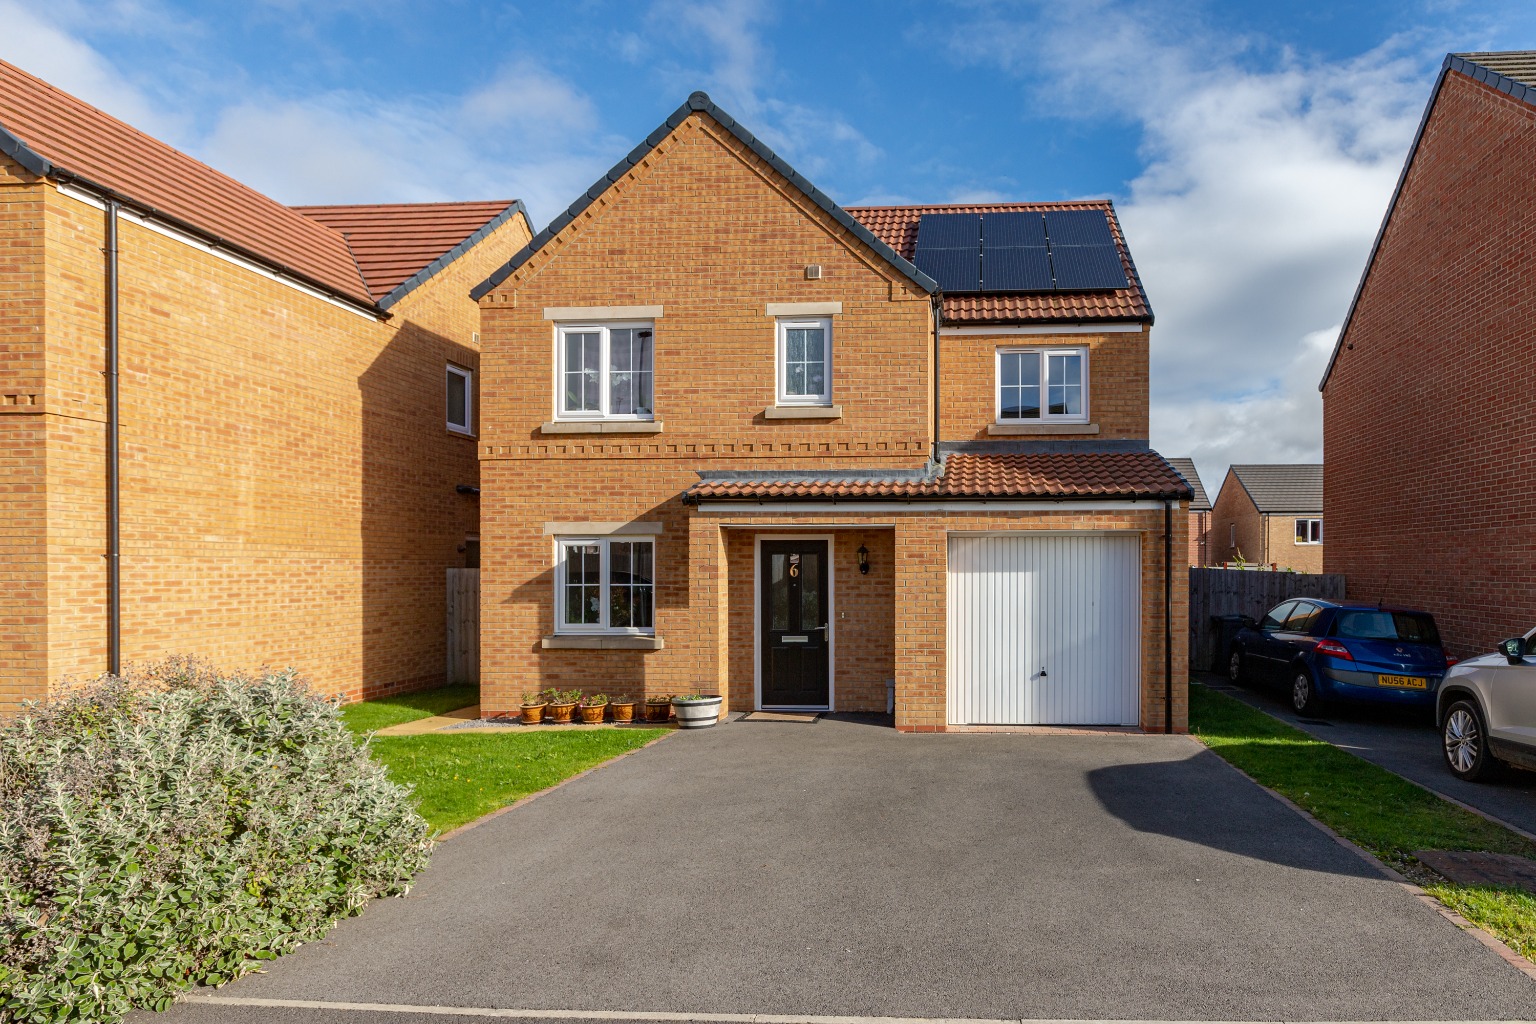 4 bed detached house to rent in Haydock Road, Catterick Garrison - Property Image 1